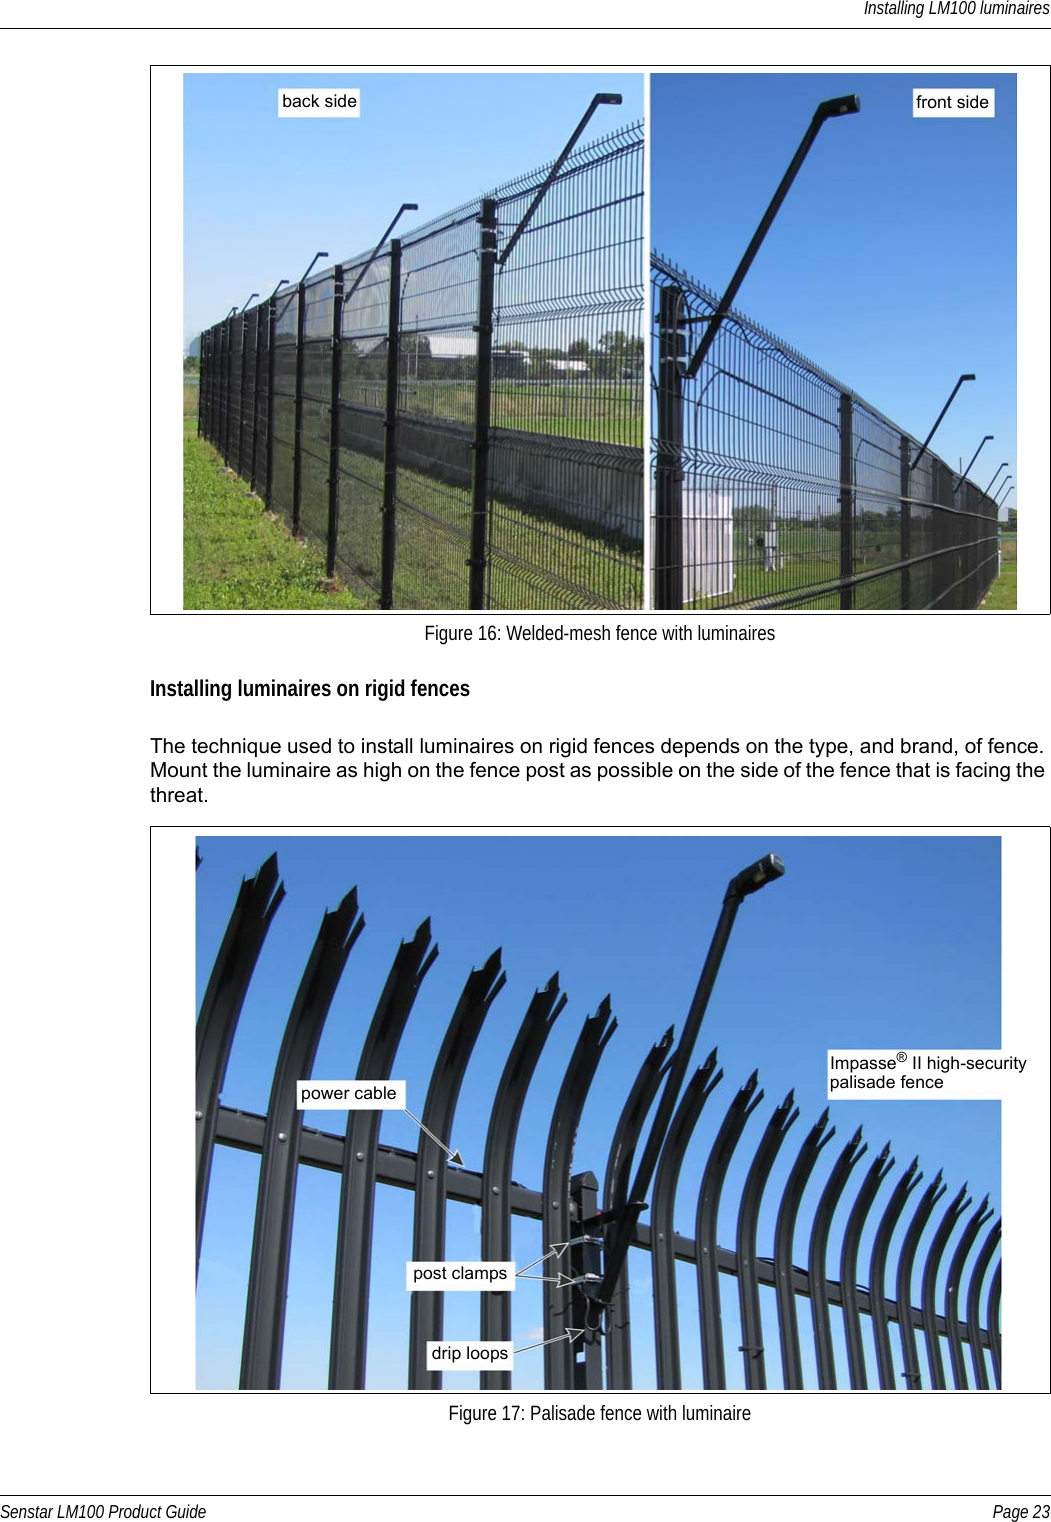 Installing LM100 luminairesSenstar LM100 Product Guide Page 23Installing luminaires on rigid fencesThe technique used to install luminaires on rigid fences depends on the type, and brand, of fence. Mount the luminaire as high on the fence post as possible on the side of the fence that is facing the threat. Figure 16: Welded-mesh fence with luminairesFigure 17: Palisade fence with luminaireback side front sideImpasse® II high-securitypalisade fencepower cablepost clampsdrip loops